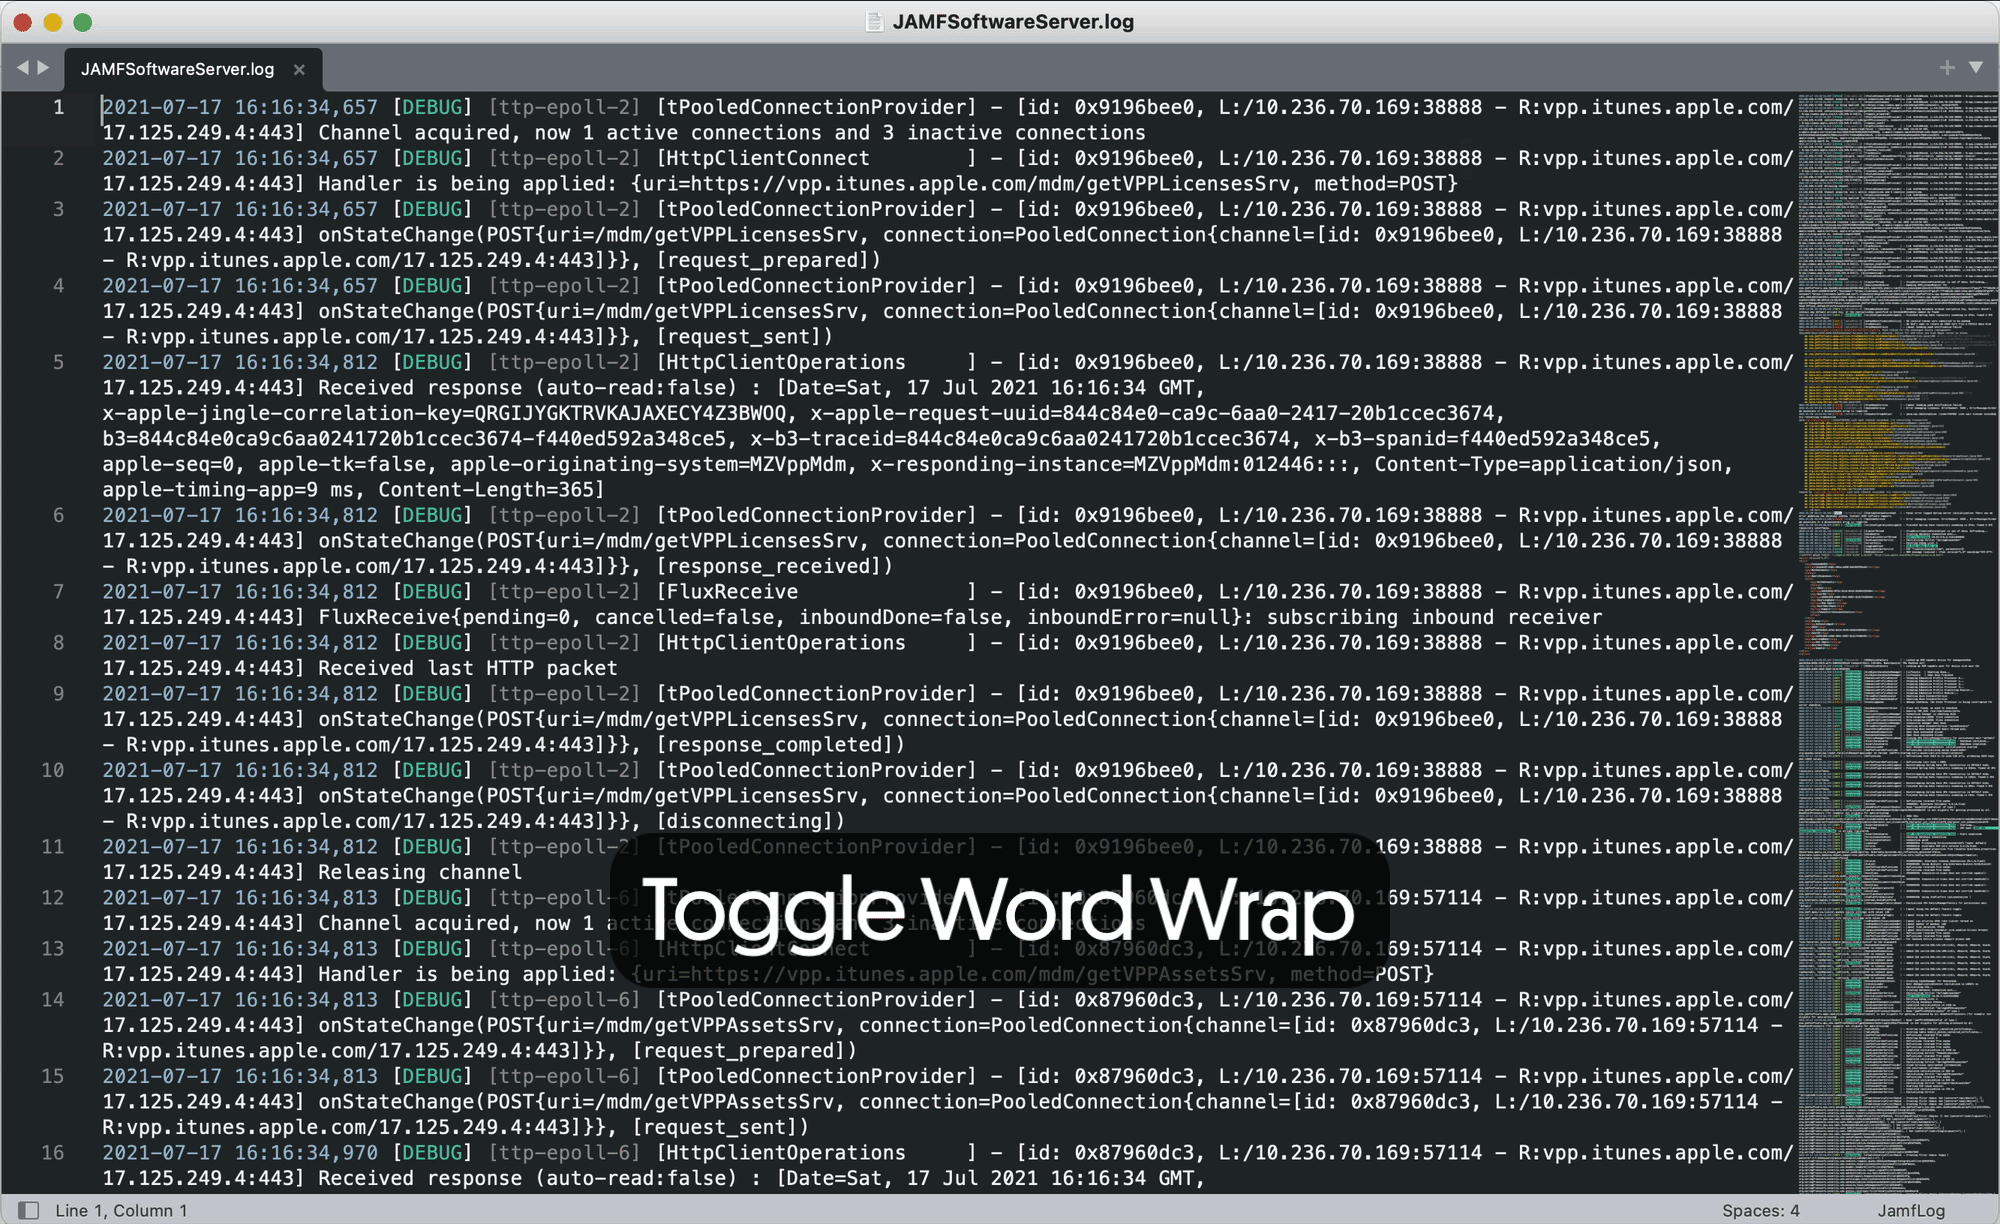 Toggle Word Wrap to manage those extra long lines